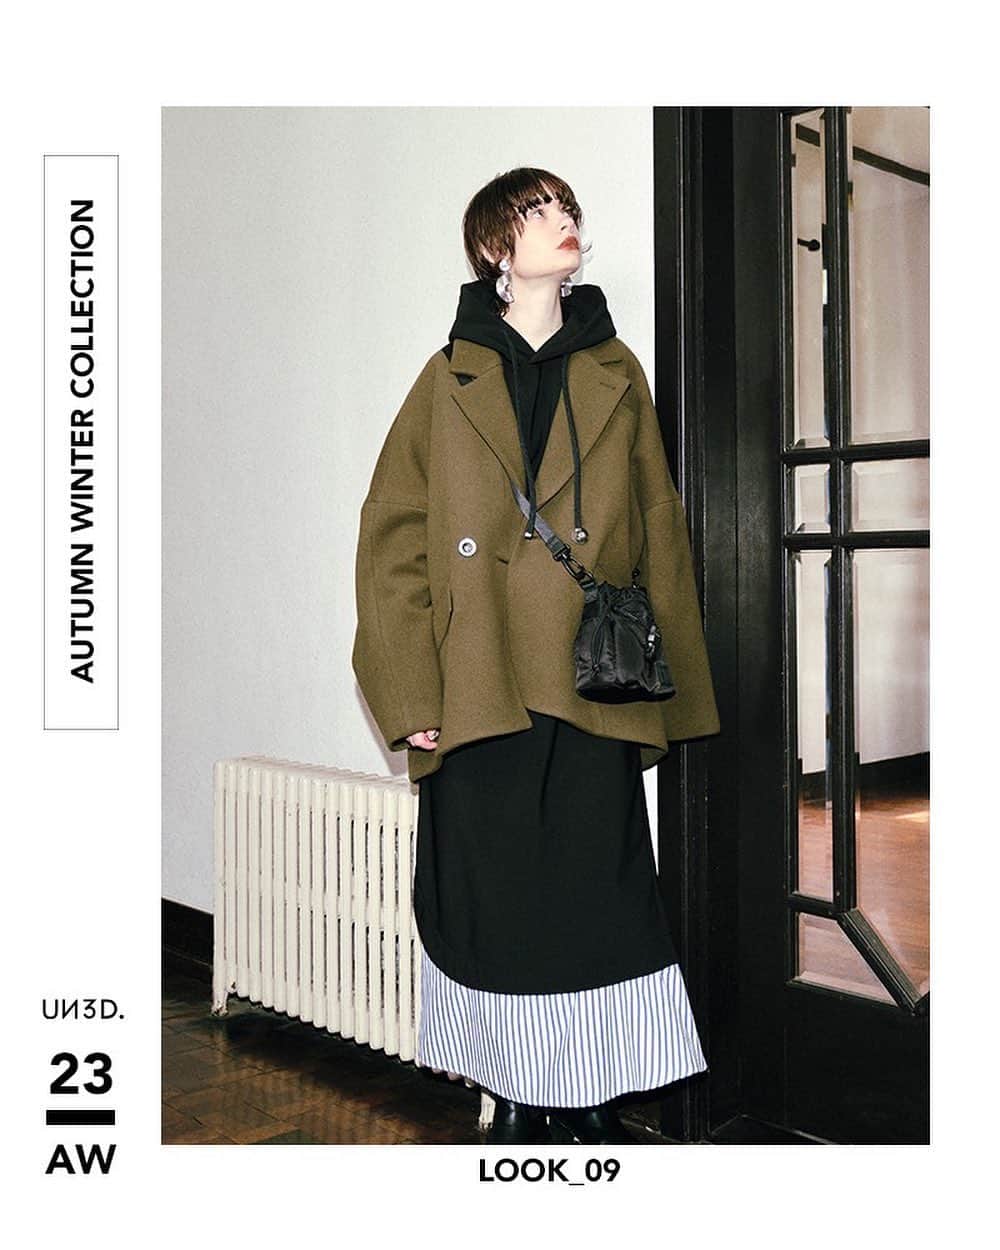 UN3D.（アンスリード）のインスタグラム：「UN3D. 2023 AUTUMN WINTER COLLECTION   DOLMAN MIDDLE WOOL CT 68,200 YEN tax in  DOCKING SWEAT OP 39,600 YEN tax in  NYLON SHOULDER BAG 13,200 YEN tax in  #UN3D#UN3D2023AW#AUTUMN#WINTER#collection」